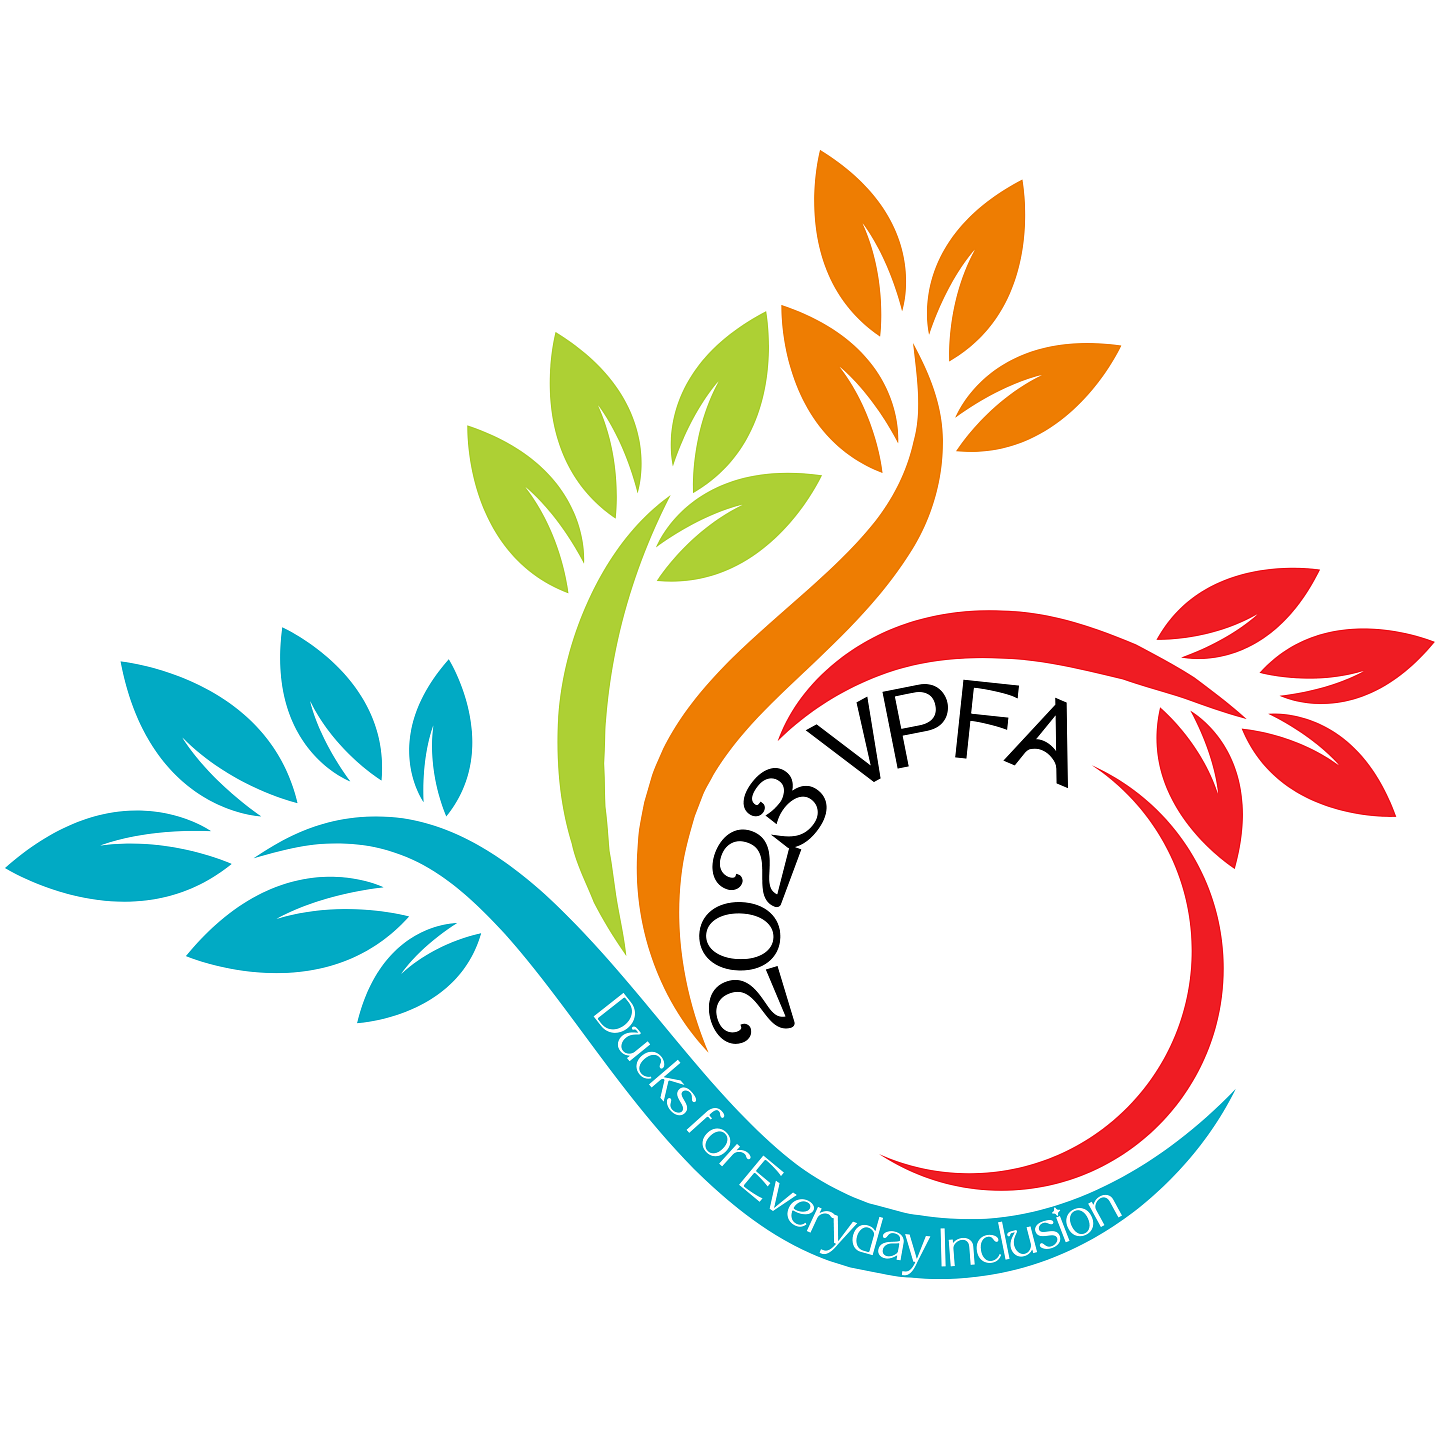 Four colorful plant leaf spirals with the text: 2023 VPFA Ducks for Everyday Inclusion (white background)